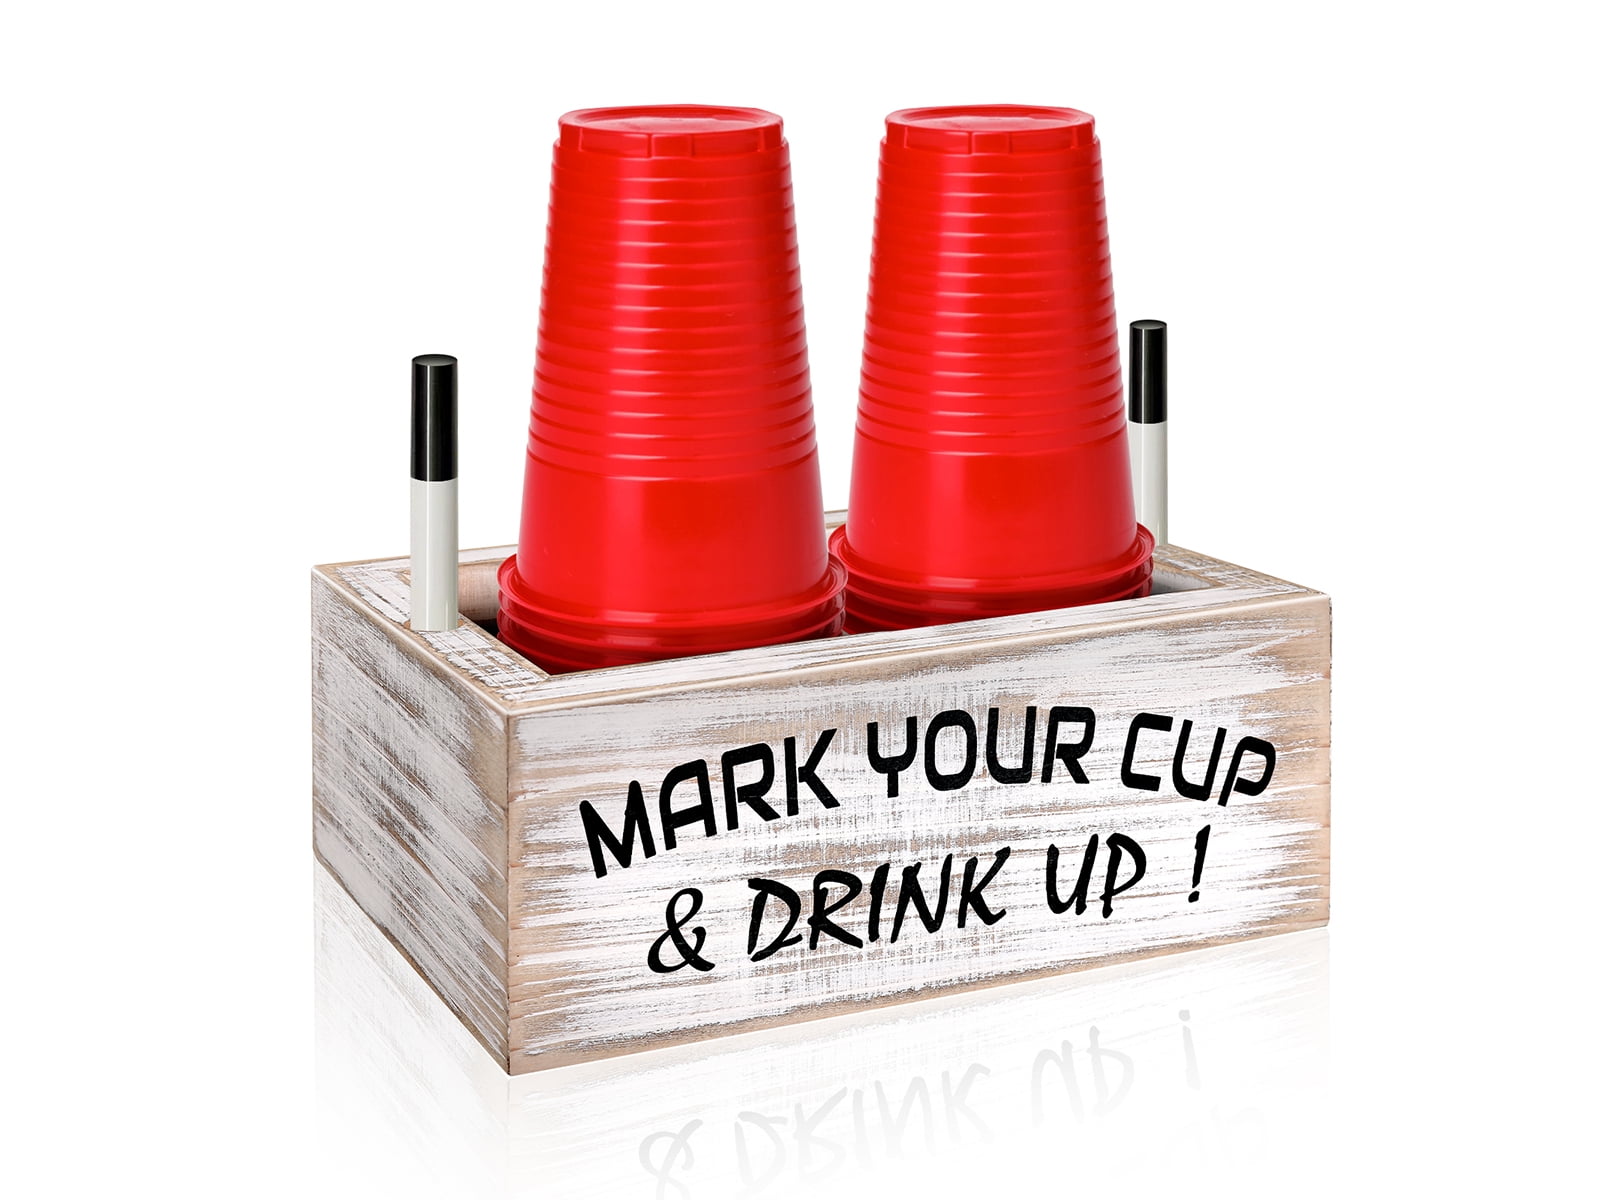 Mini Stanley Drink Cup Decoration by Cluck-n-Chong - MakerWorld